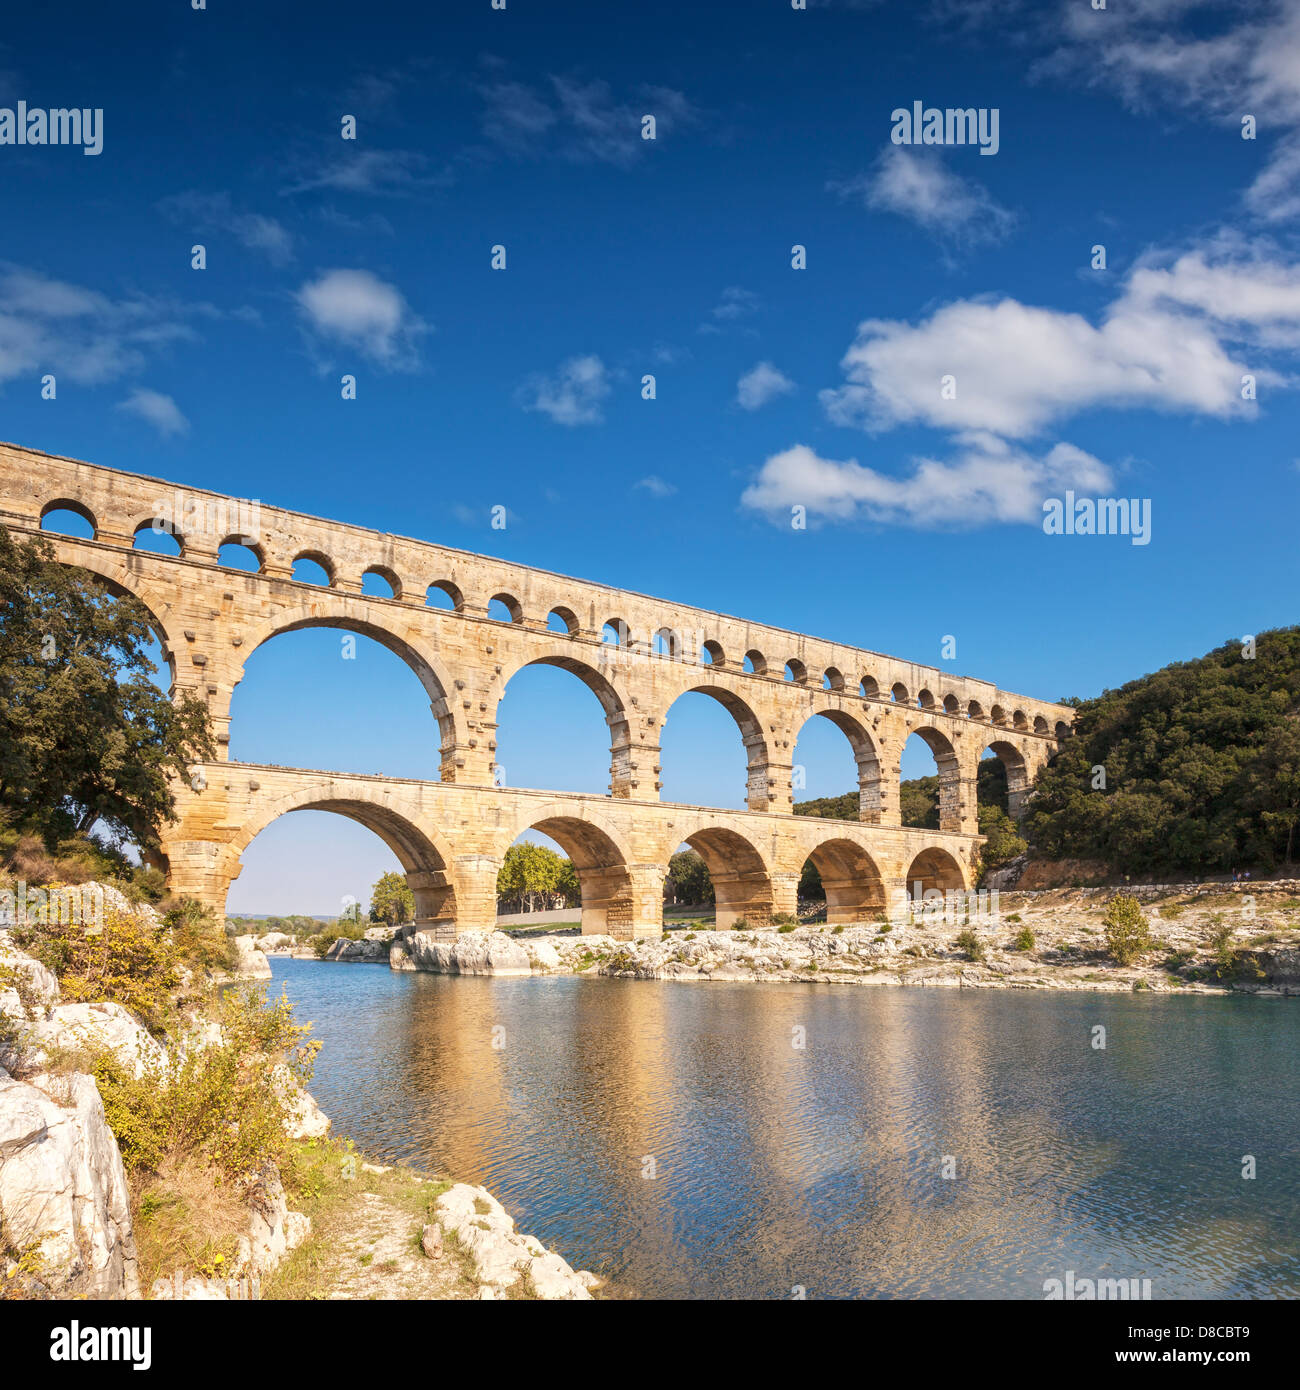 Pont du Gard Roman Aqueduct Languedoc-Roussillon France. The 2000 year old Roman Aquaduct is a huge tourist attraction. Stock Photo